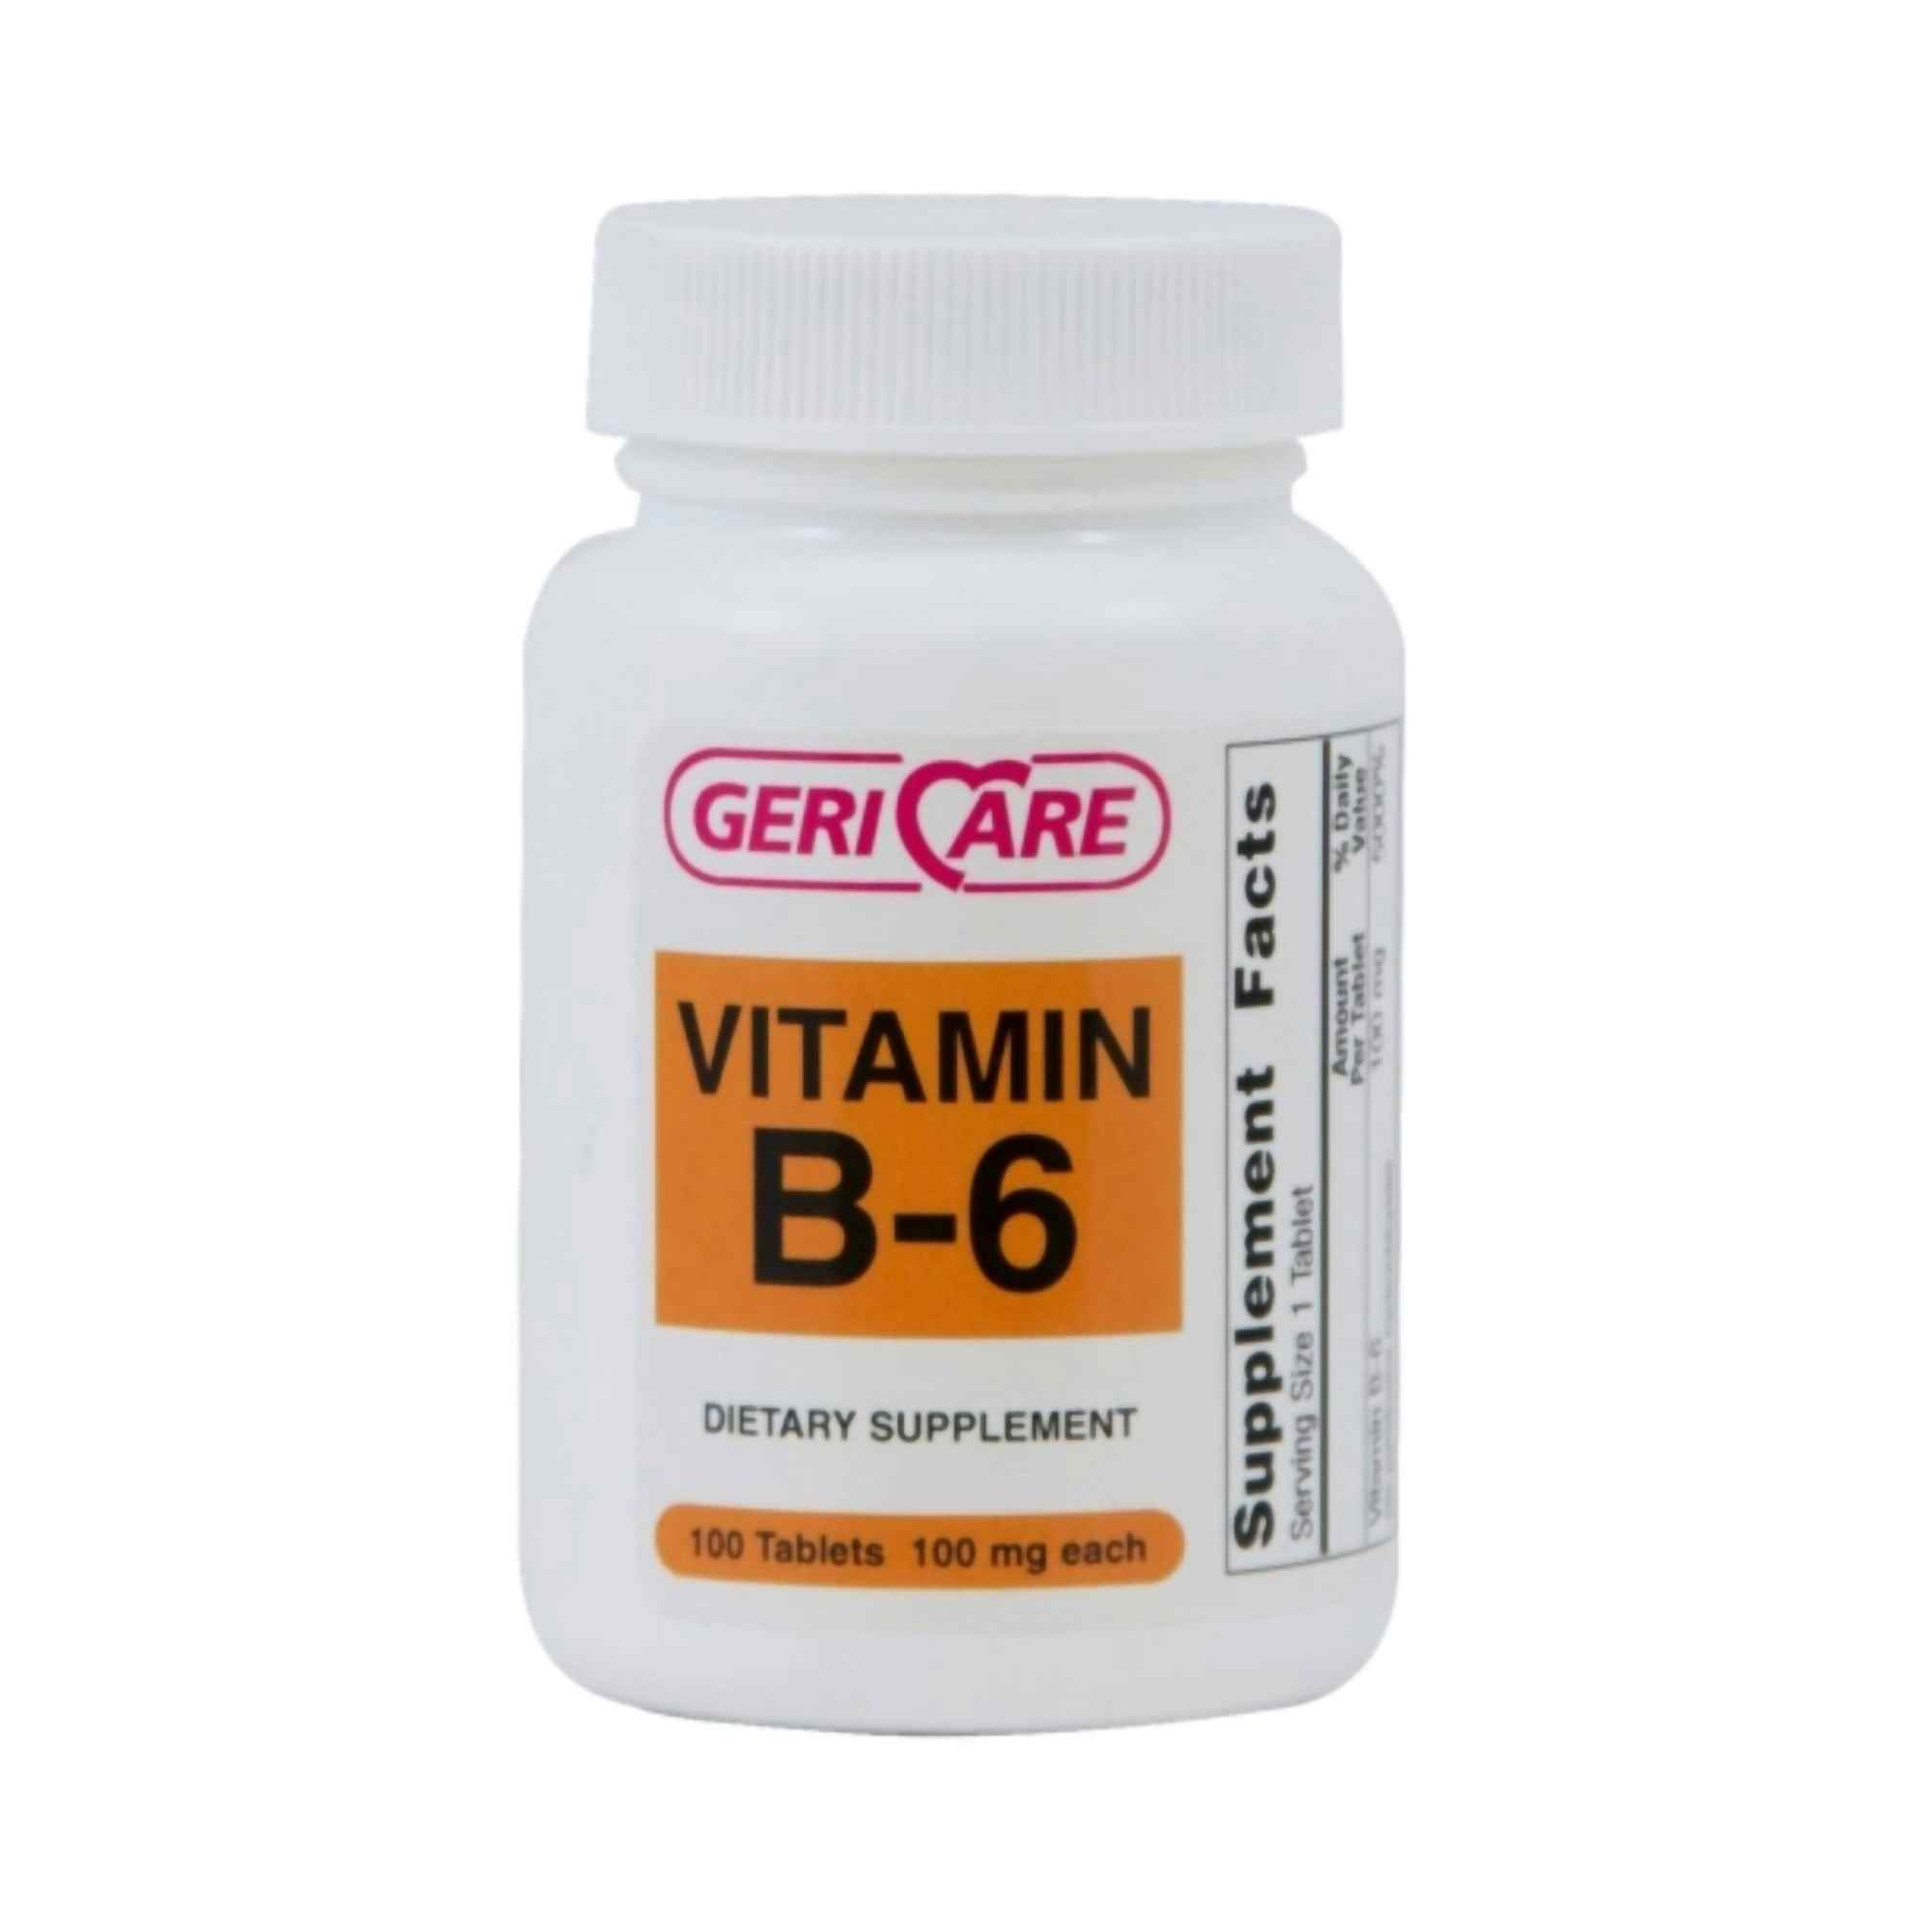 Geri-Care Vitamin B6 Dietary Supplements, 854-01-GCP, 100 mg - 1 Bottle (100 Tablets)